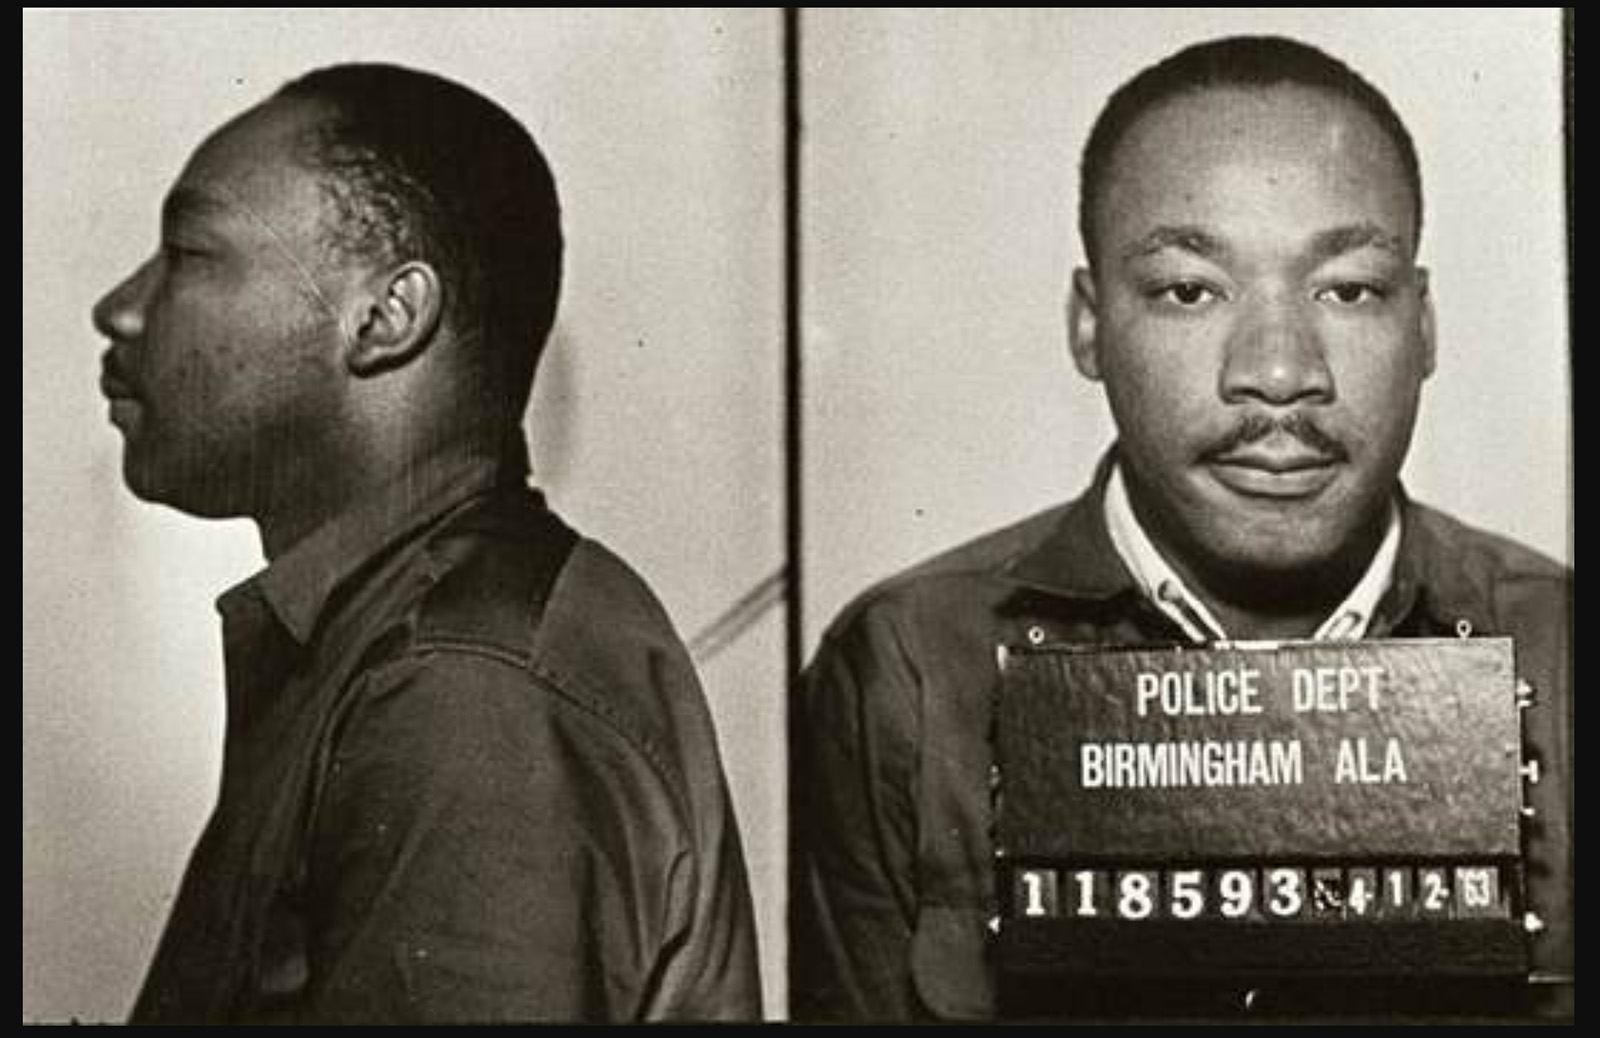 Mugshots of the Rev. Martin Luther King Jr. on April 12, 1963, in Birmingham, Alabama. Photo courtesy of Creative Commons